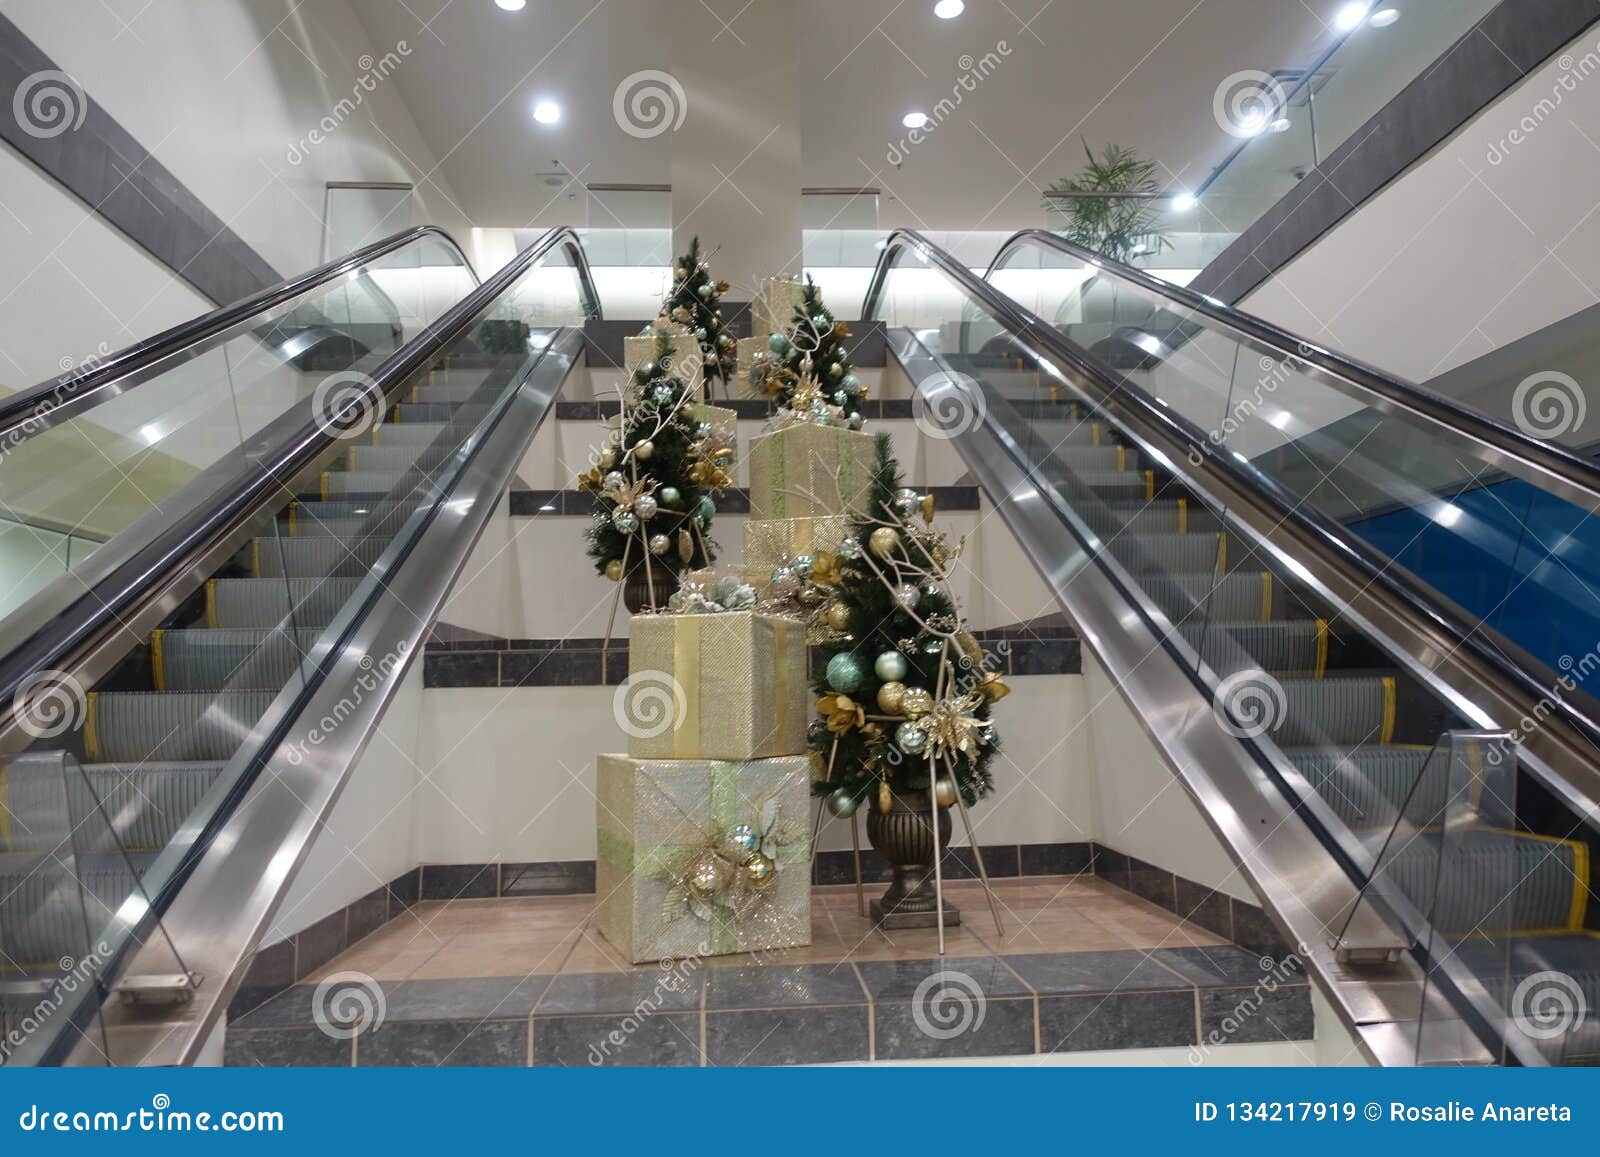 December 2018 Christmas Decorations in the Middle of Elevators in